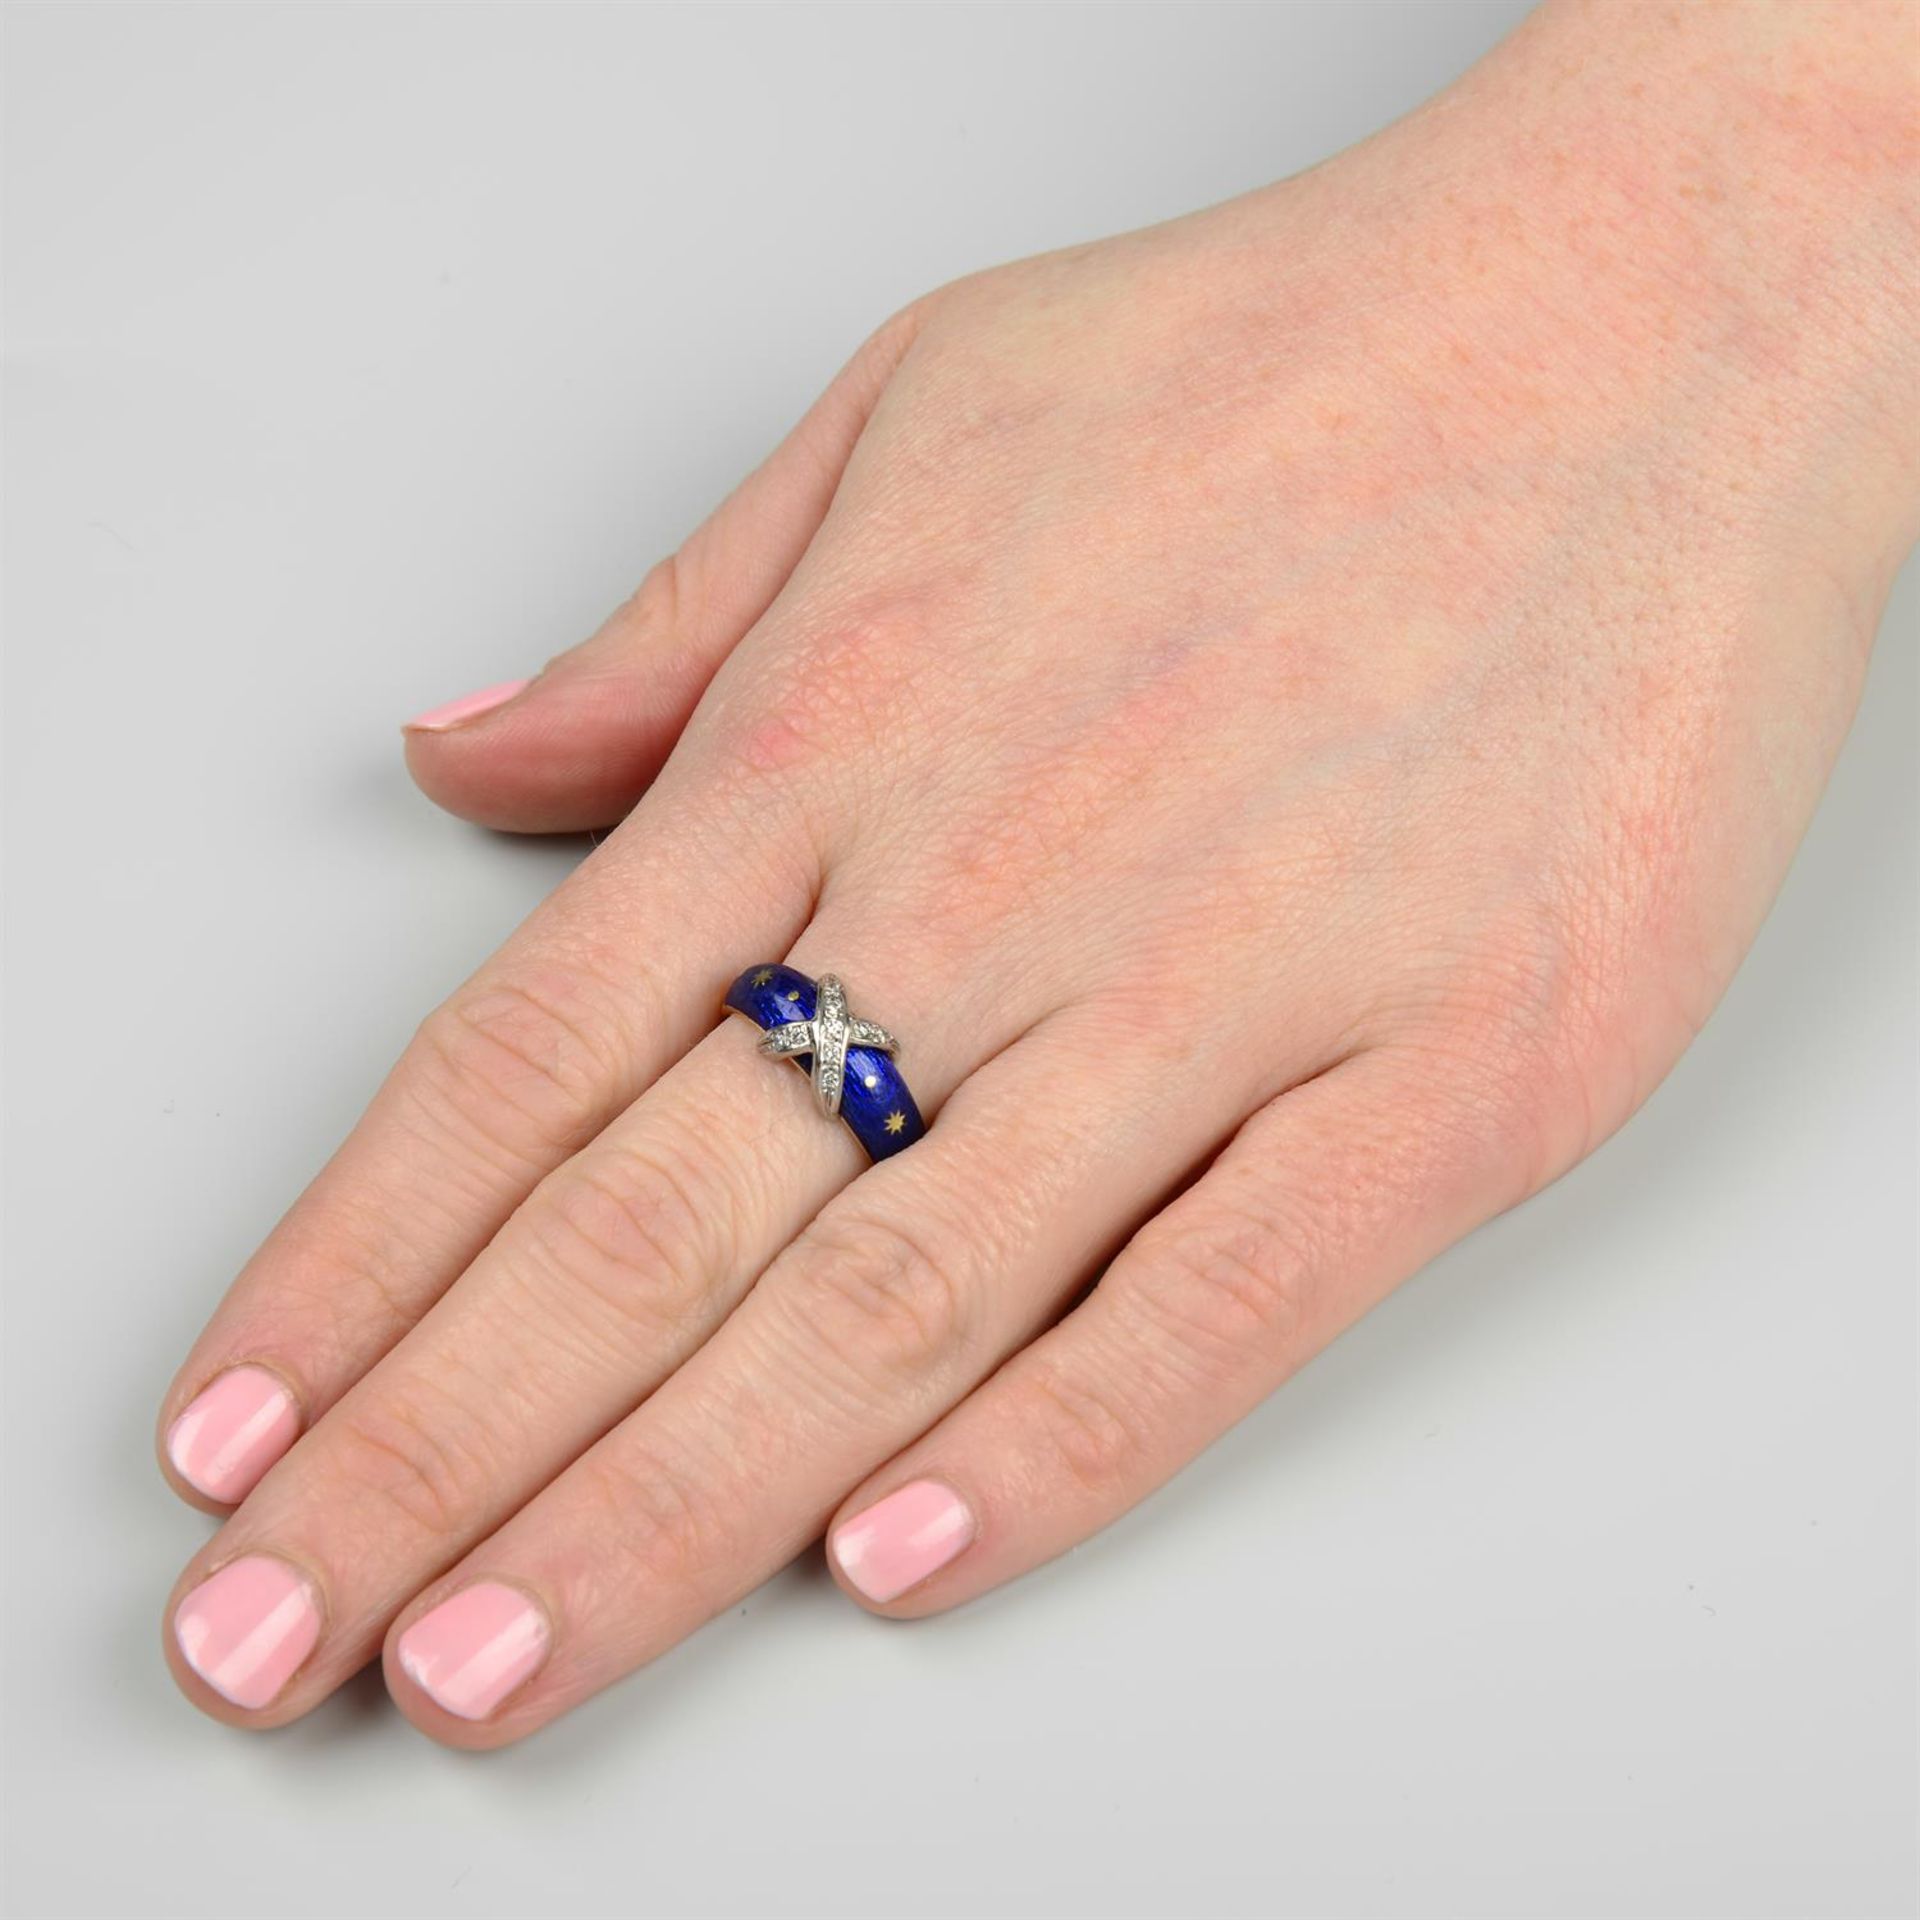 A limited edition diamond and blue enamel ring, by Victor Mayer for Fabergé. - Bild 5 aus 5